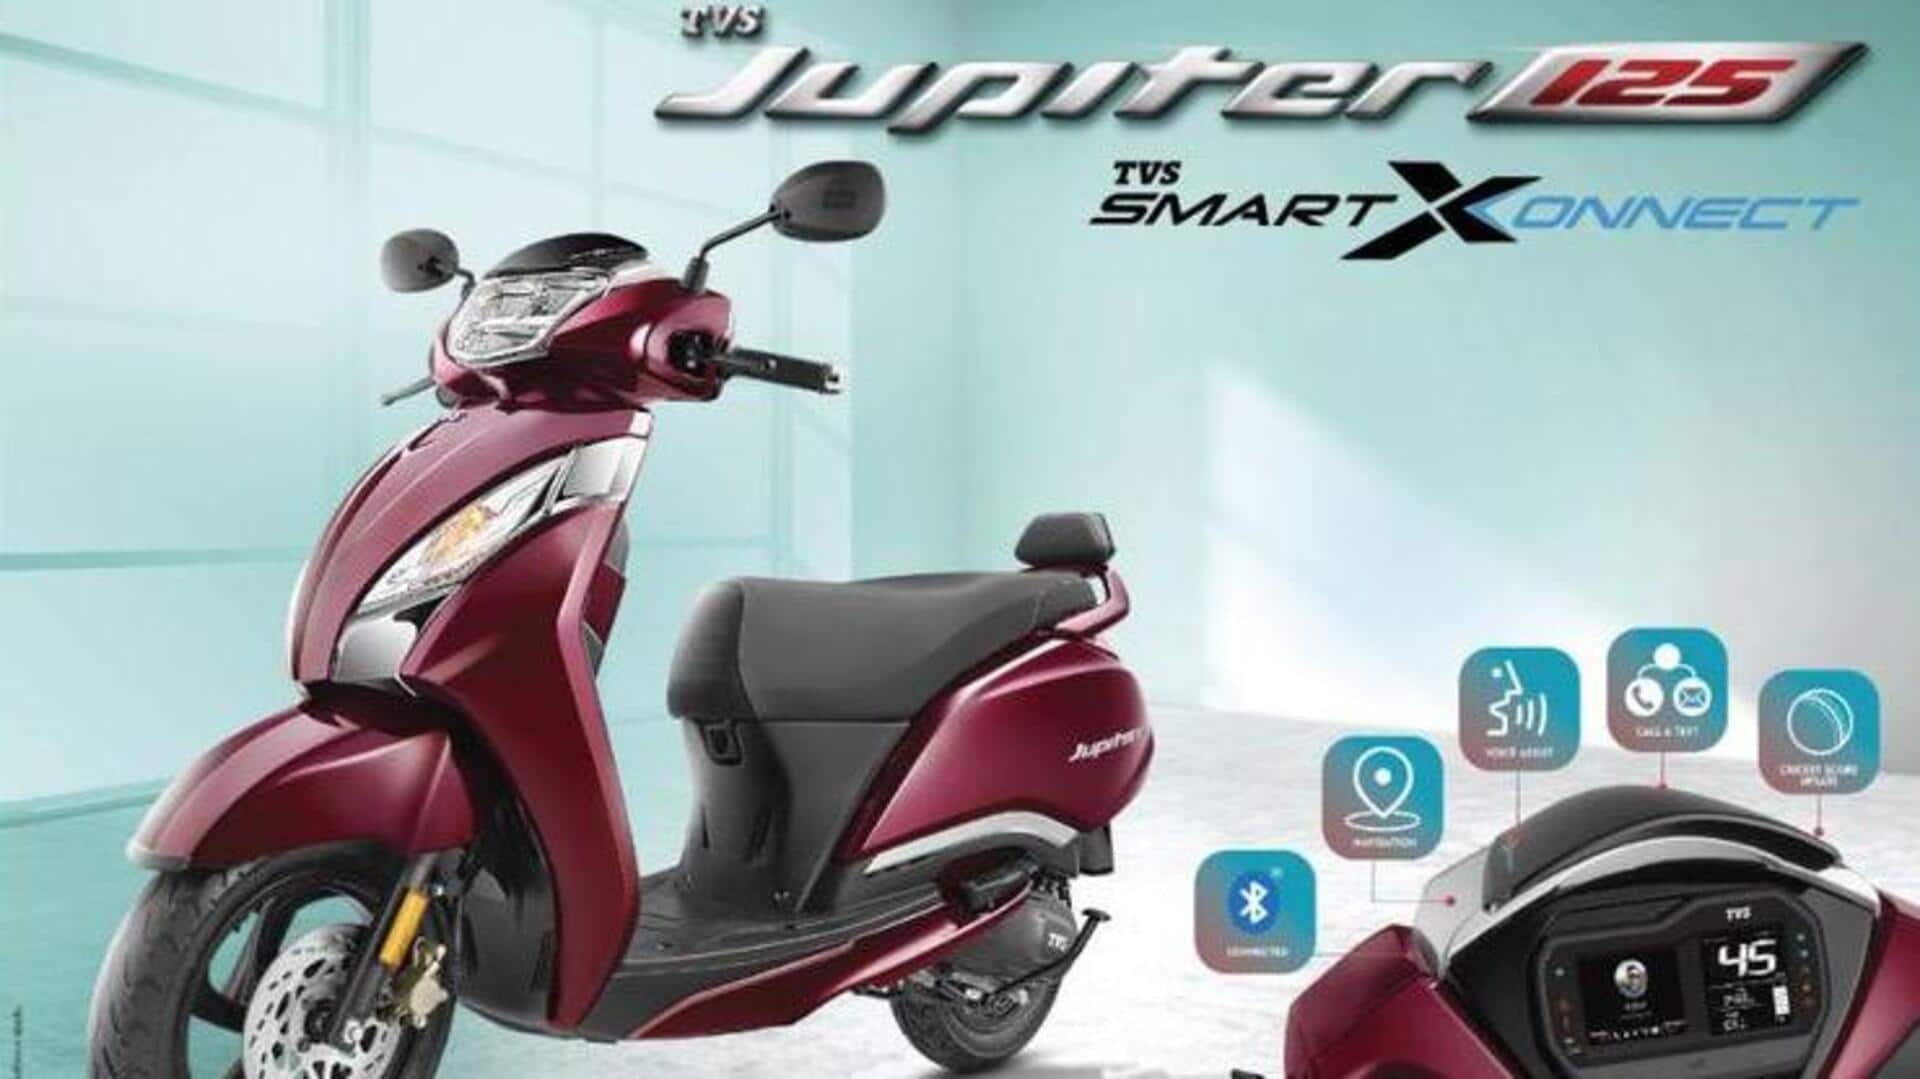 TVS Jupiter 125 with SmartXonnect launched at Rs. 97,000